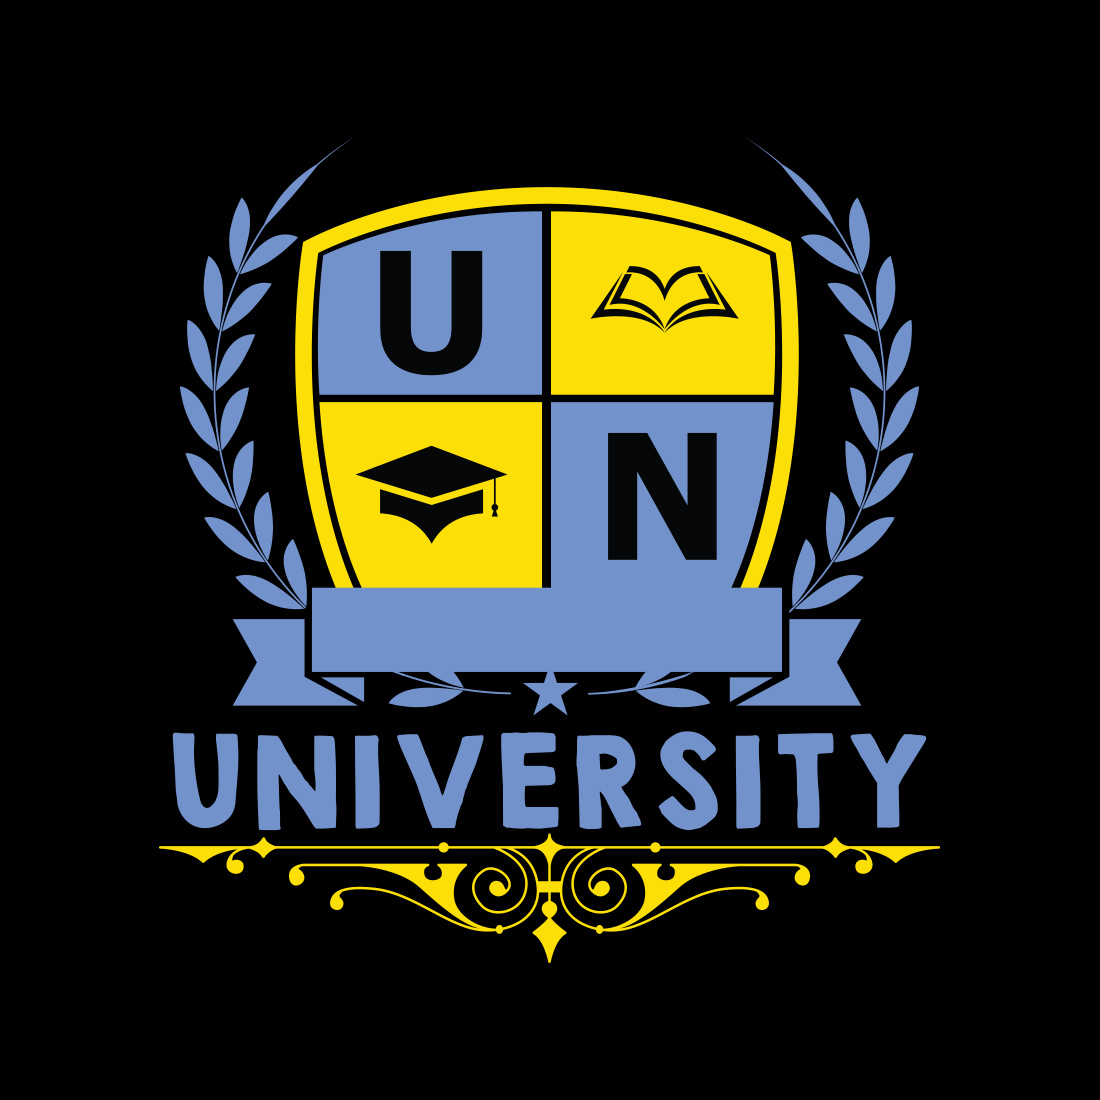 The university logo with a laurel around it.